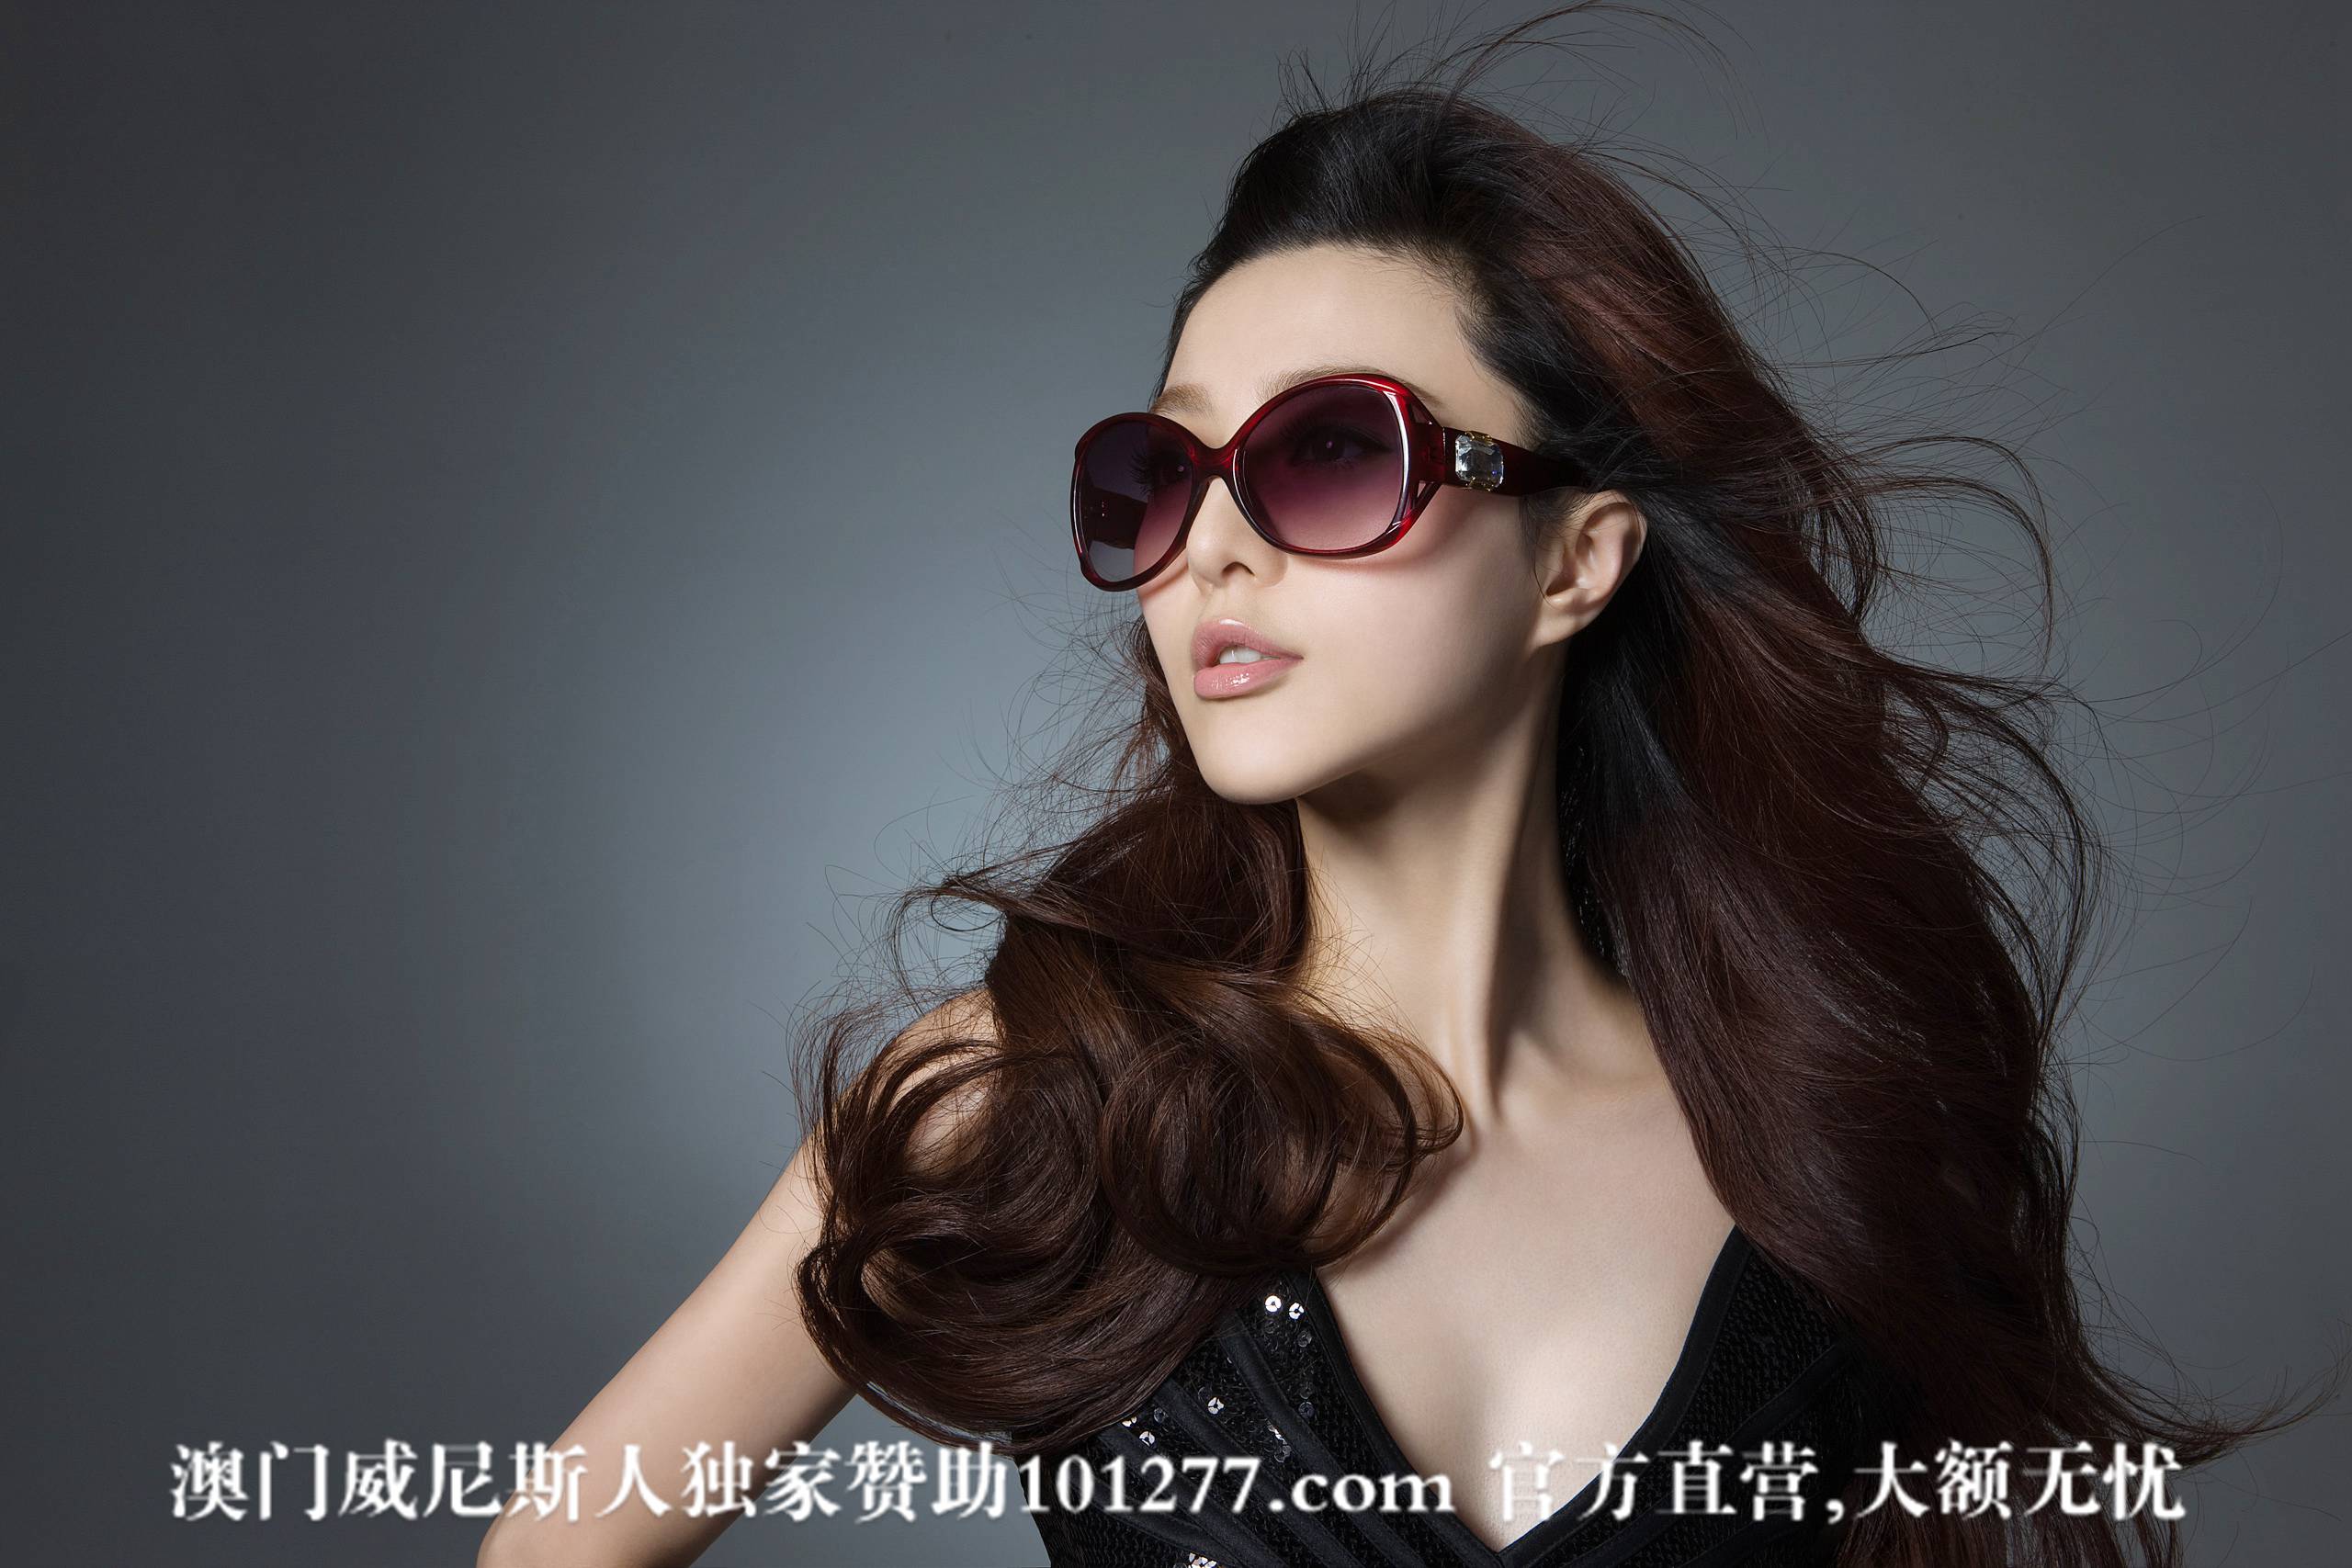 Fan Bingbing nude, pictures, photos, Playboy, naked, topless, fappening